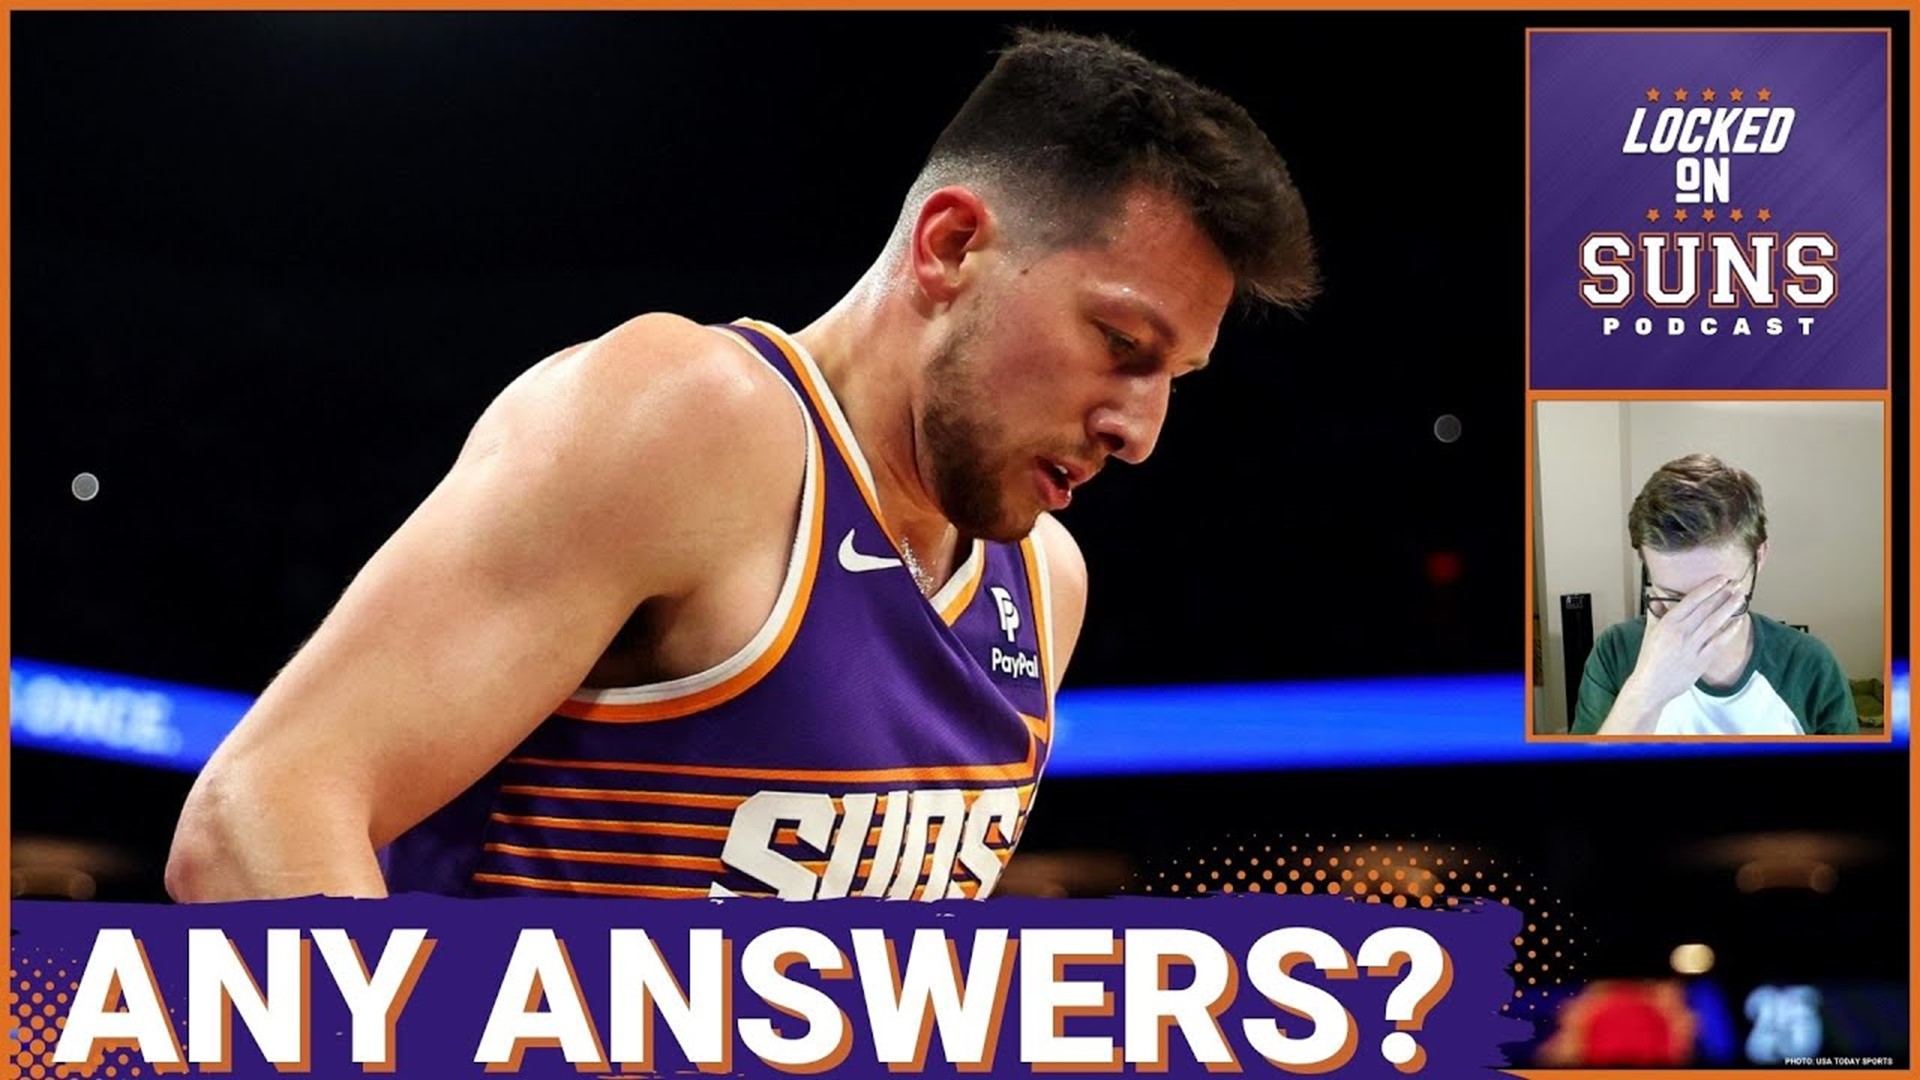 The Phoenix Suns might have hit rock bottom going down 37 in the first half to the Los Angeles Clippers in a home loss on Tuesday night.